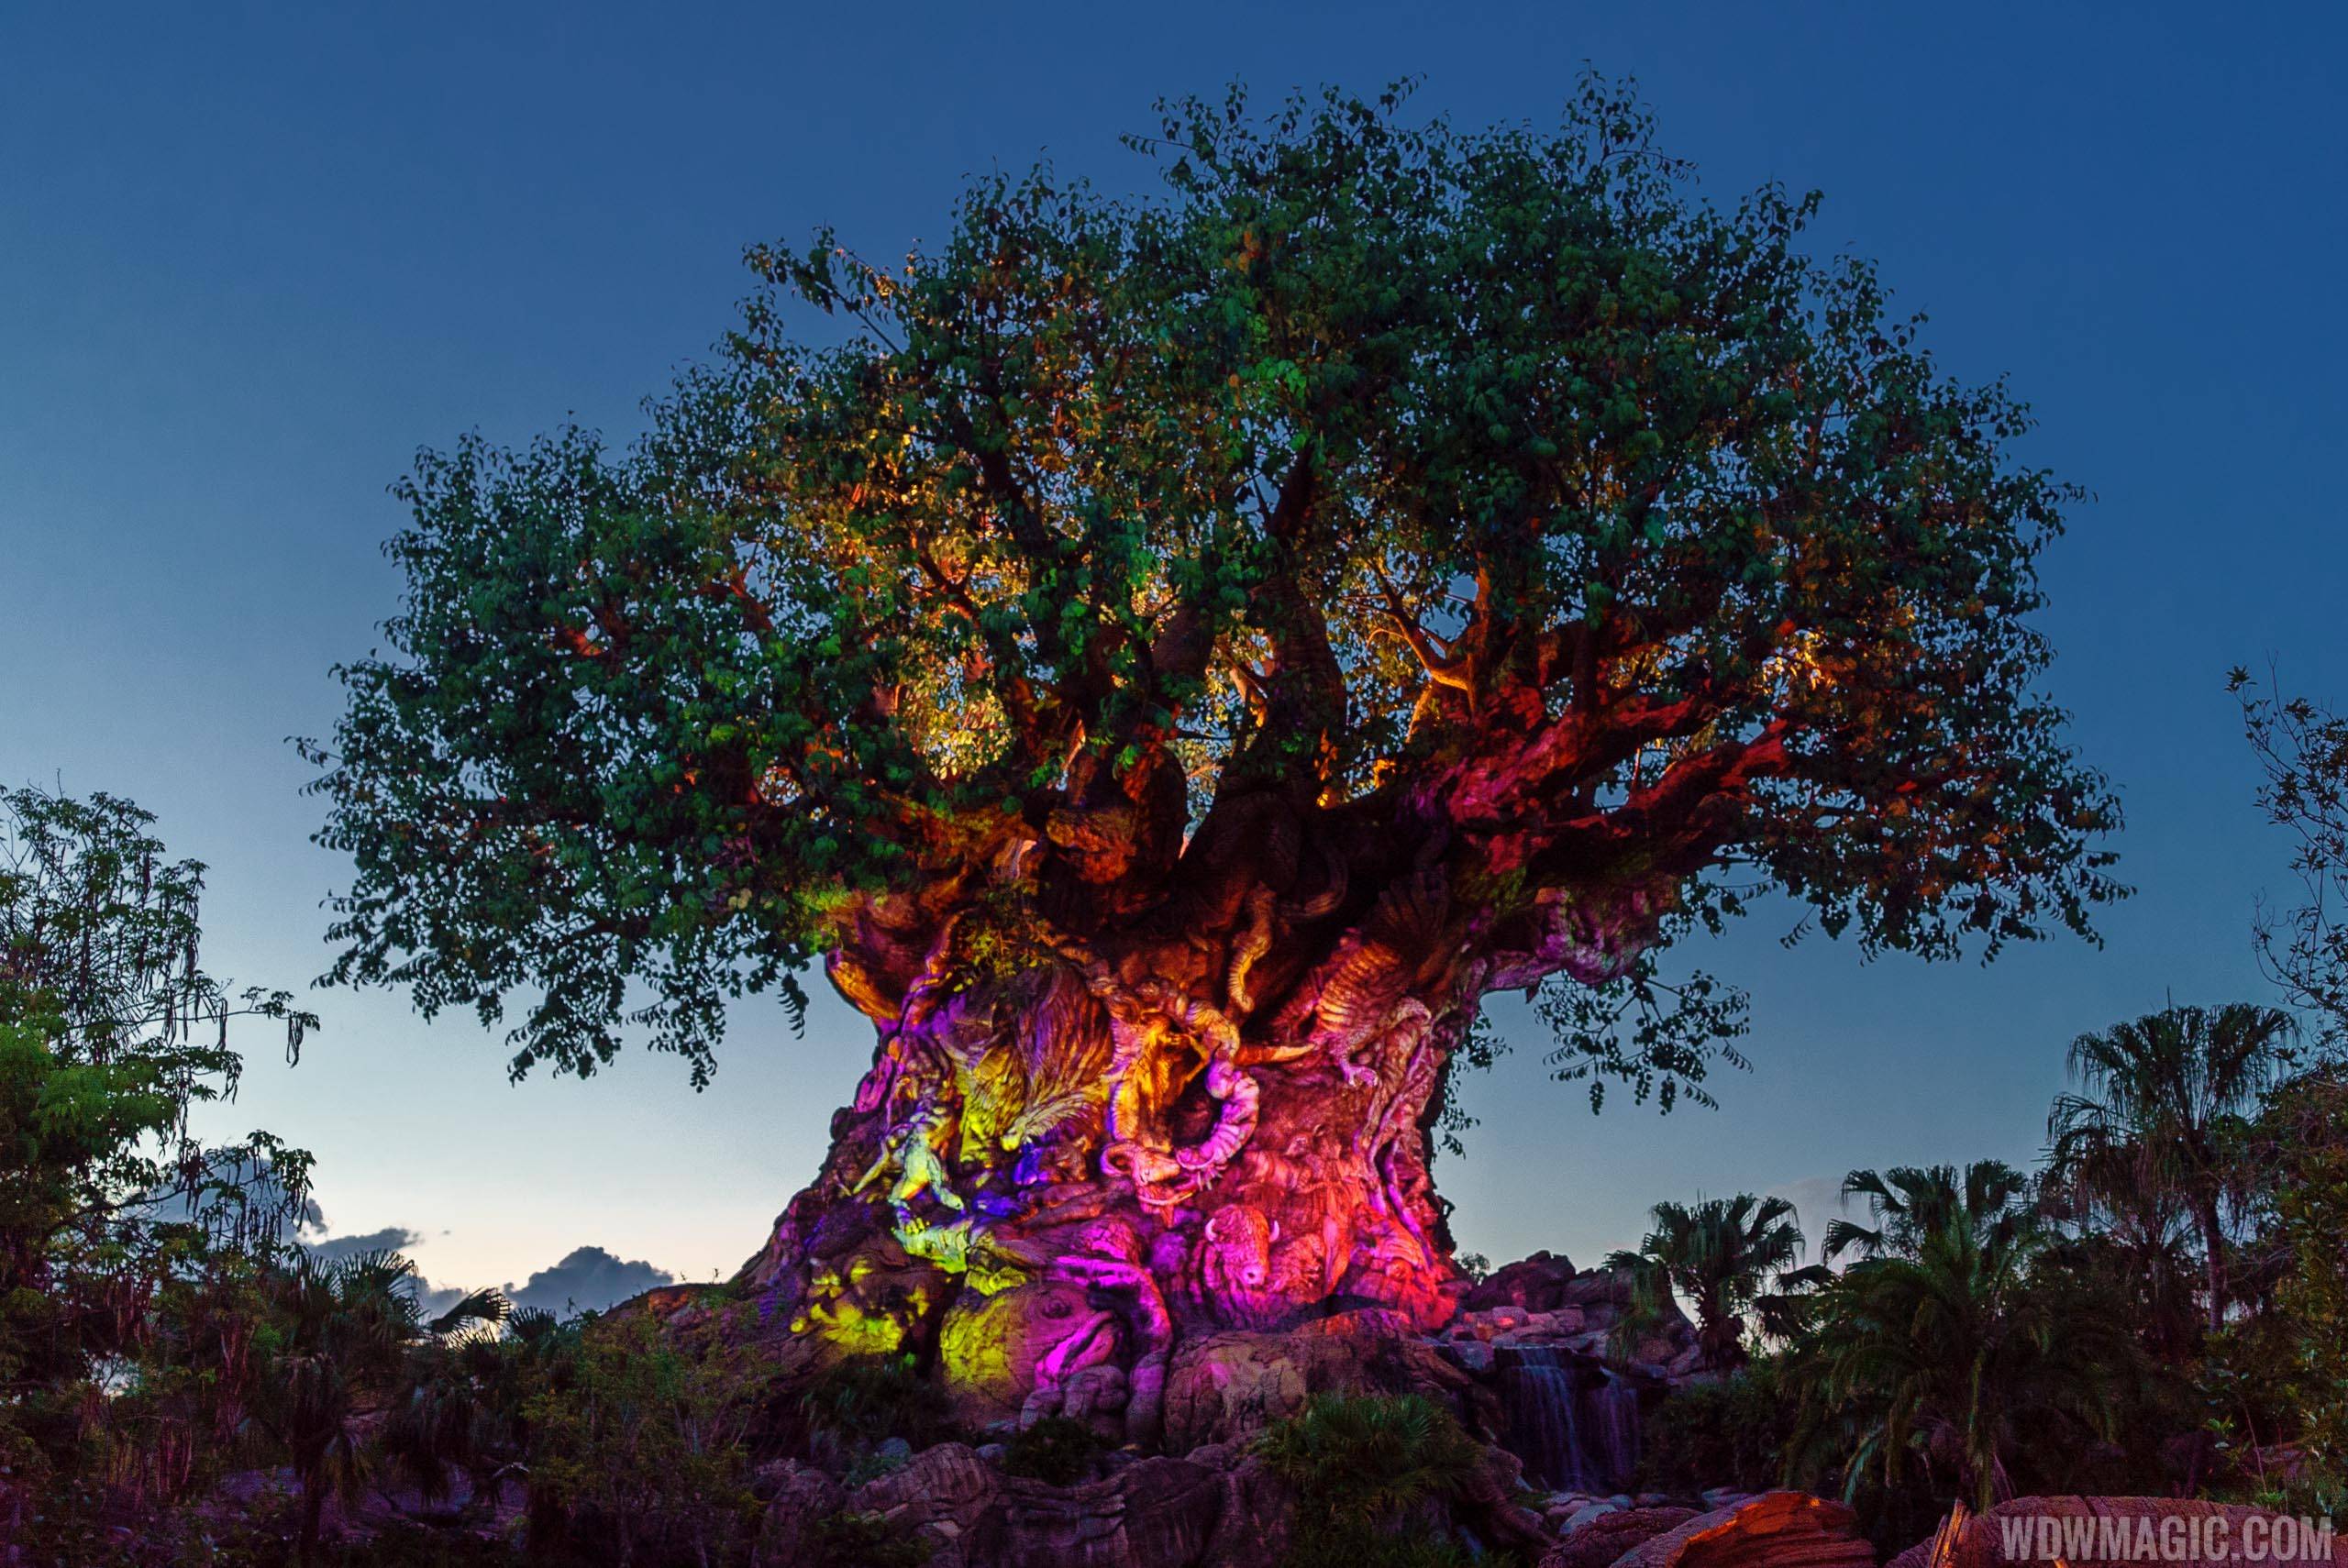 VIDEO - Drones surround the Tree of Life for special media event moment